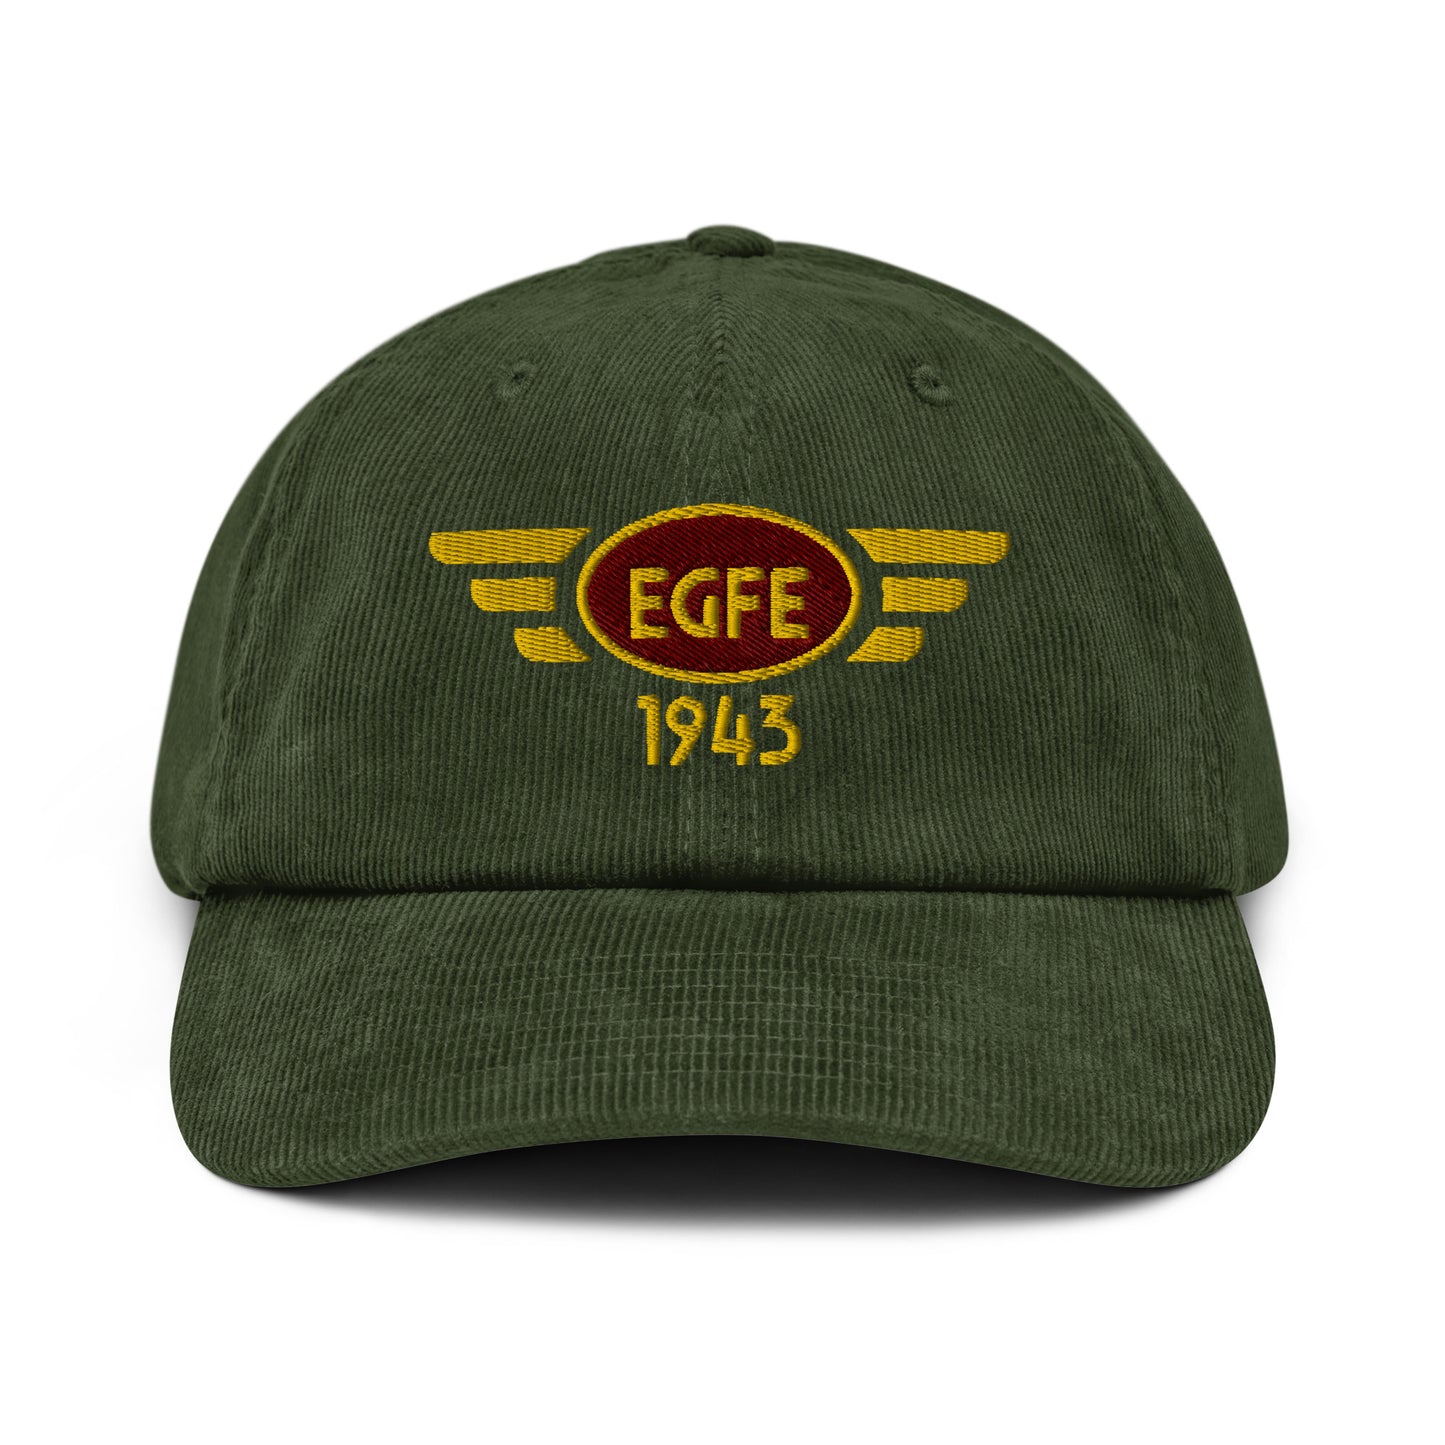 Haverfordwest Airport corduroy cap with embroidered ICAO code.